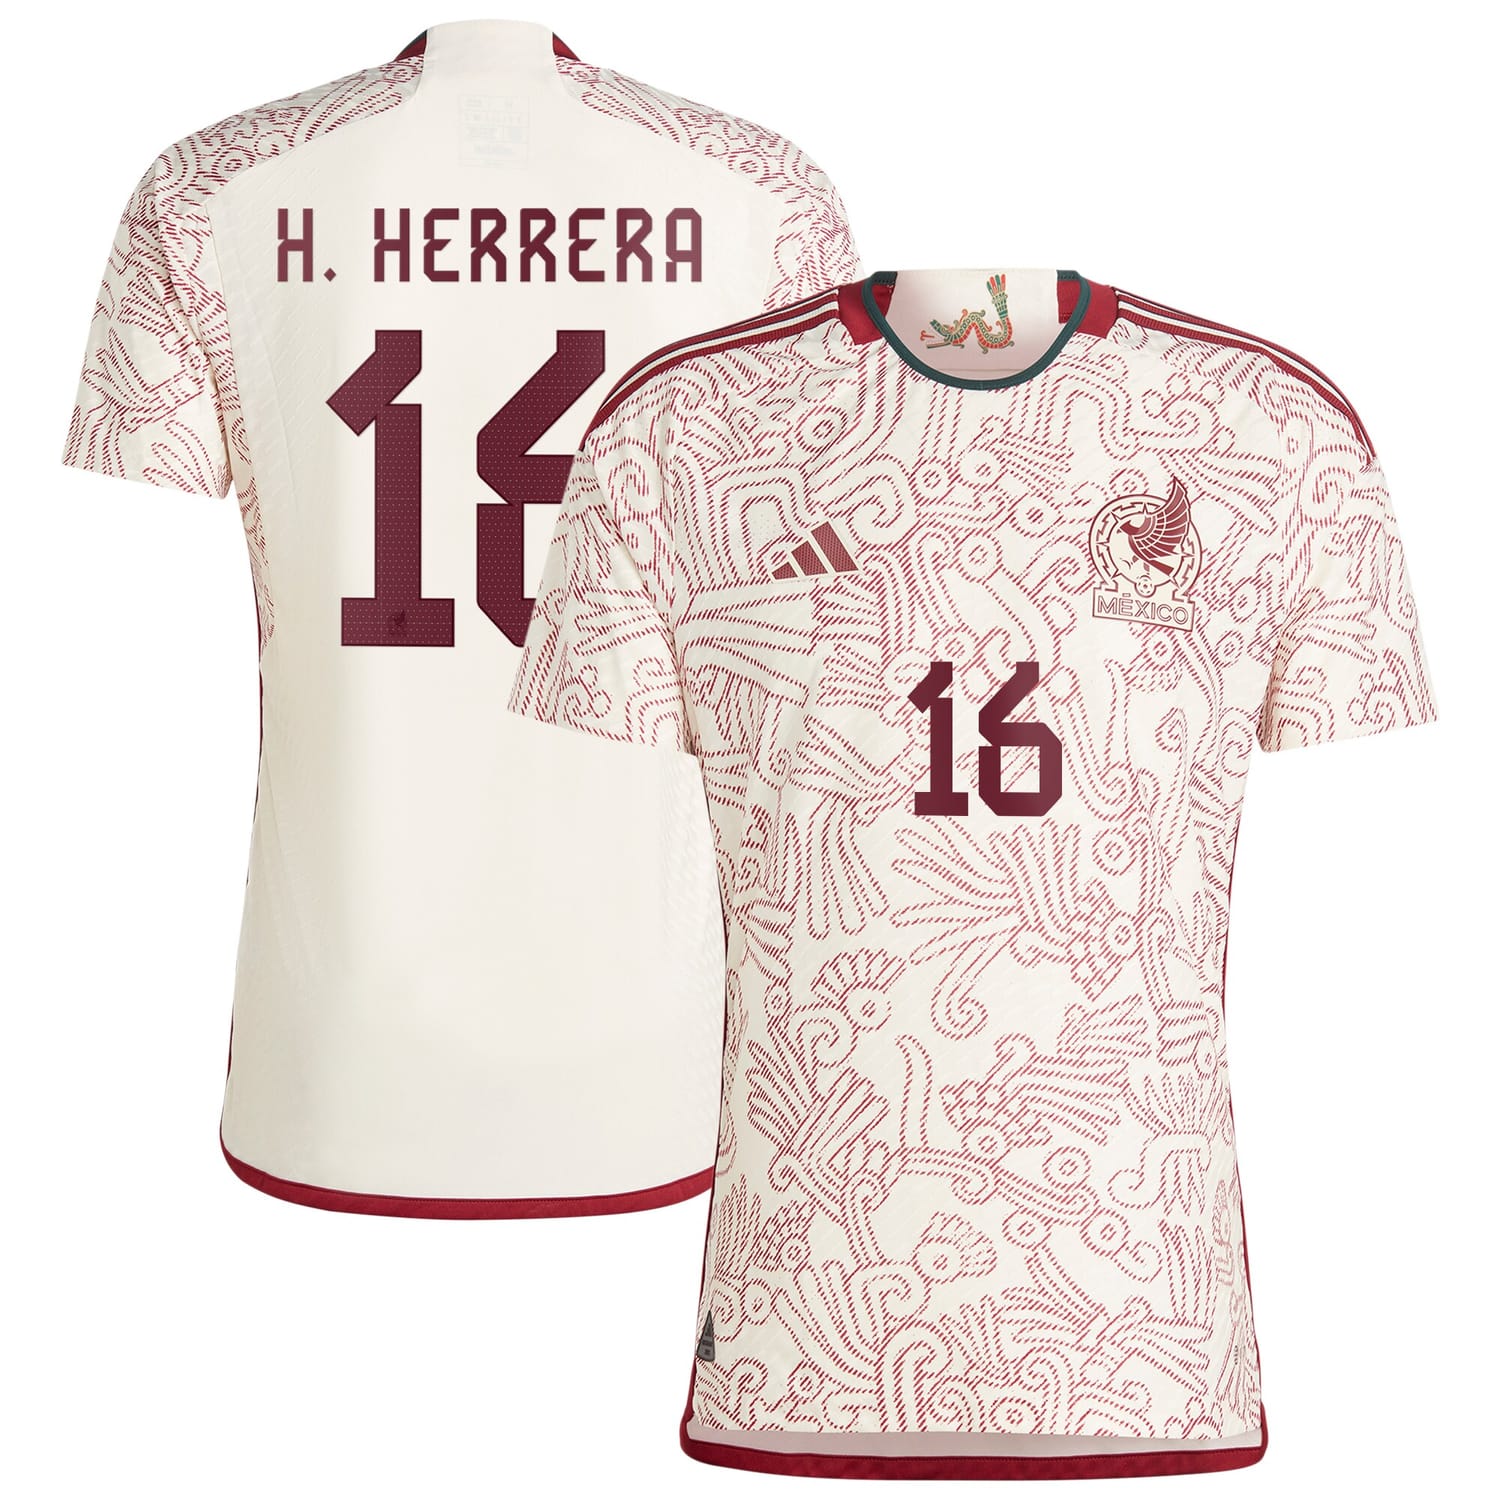 Mexico National Team Away Authentic Jersey Shirt White 2022-23 player Héctor Herrera printing for Men